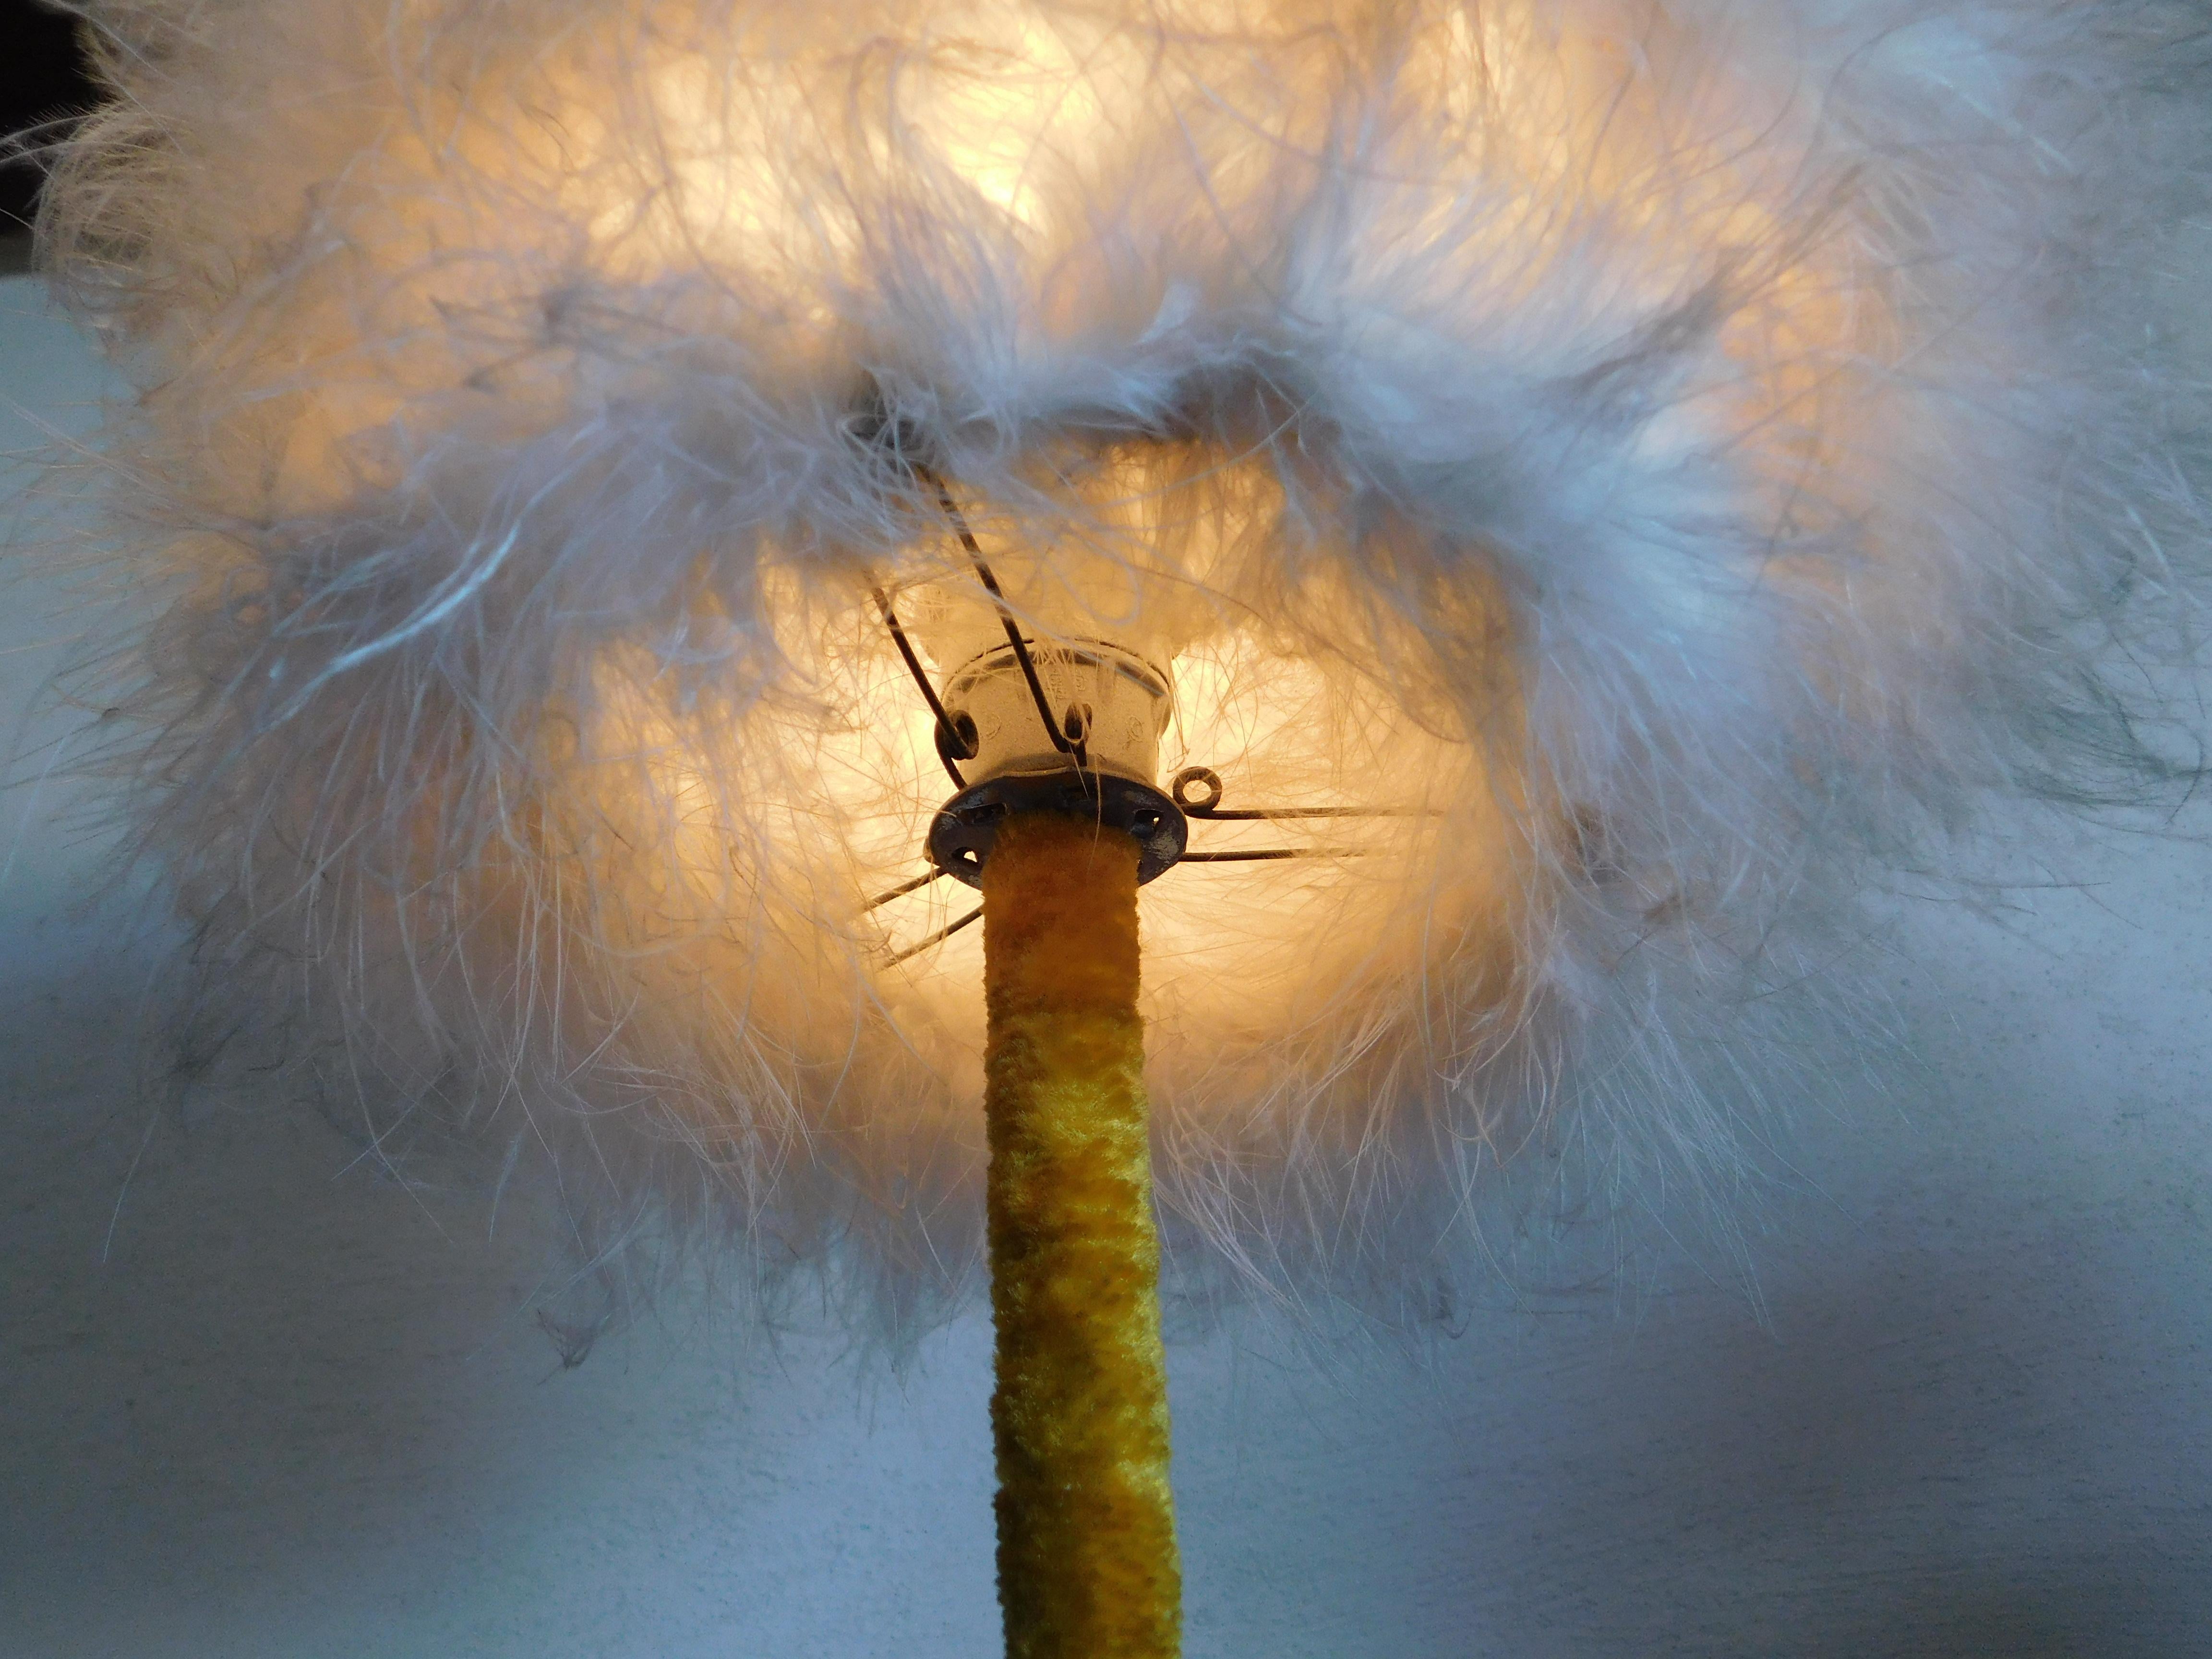 Dr Seuss-Esque Vintage French Feather and Velvet Table Lamp im Zustand „Gut“ im Angebot in Antwerp, BE